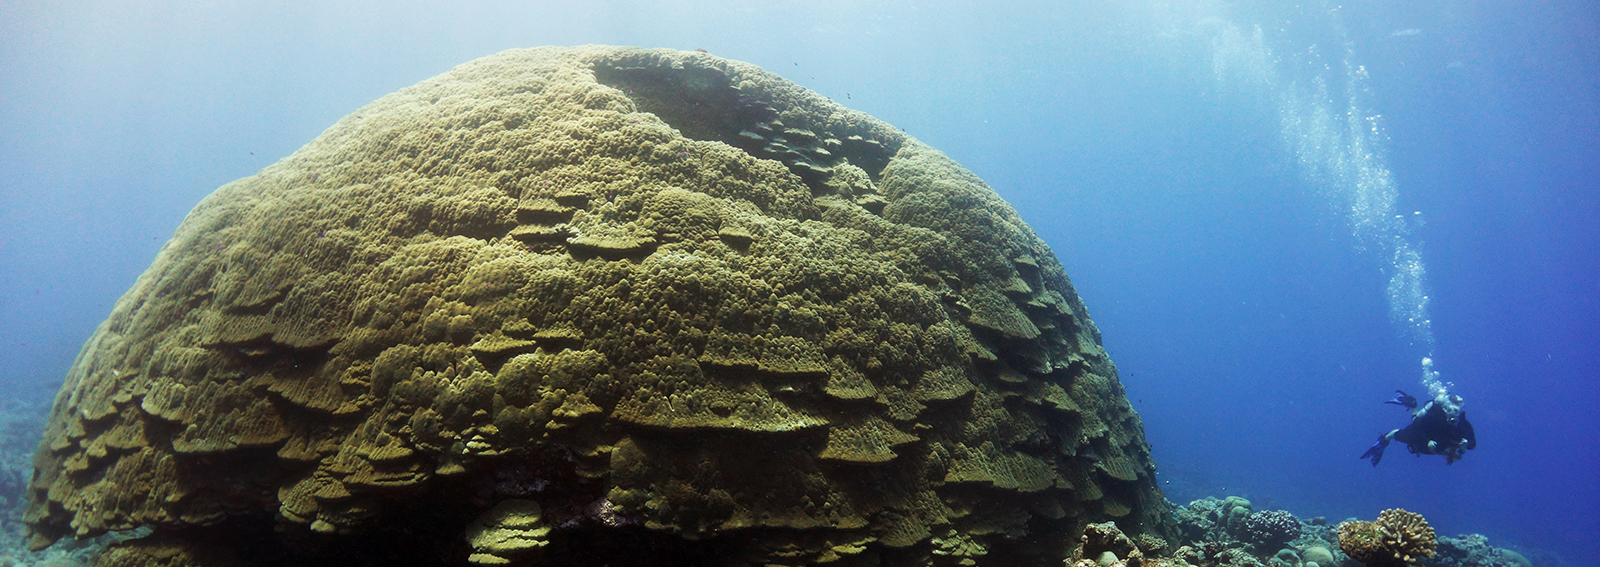 A diver swims next to a large coral head